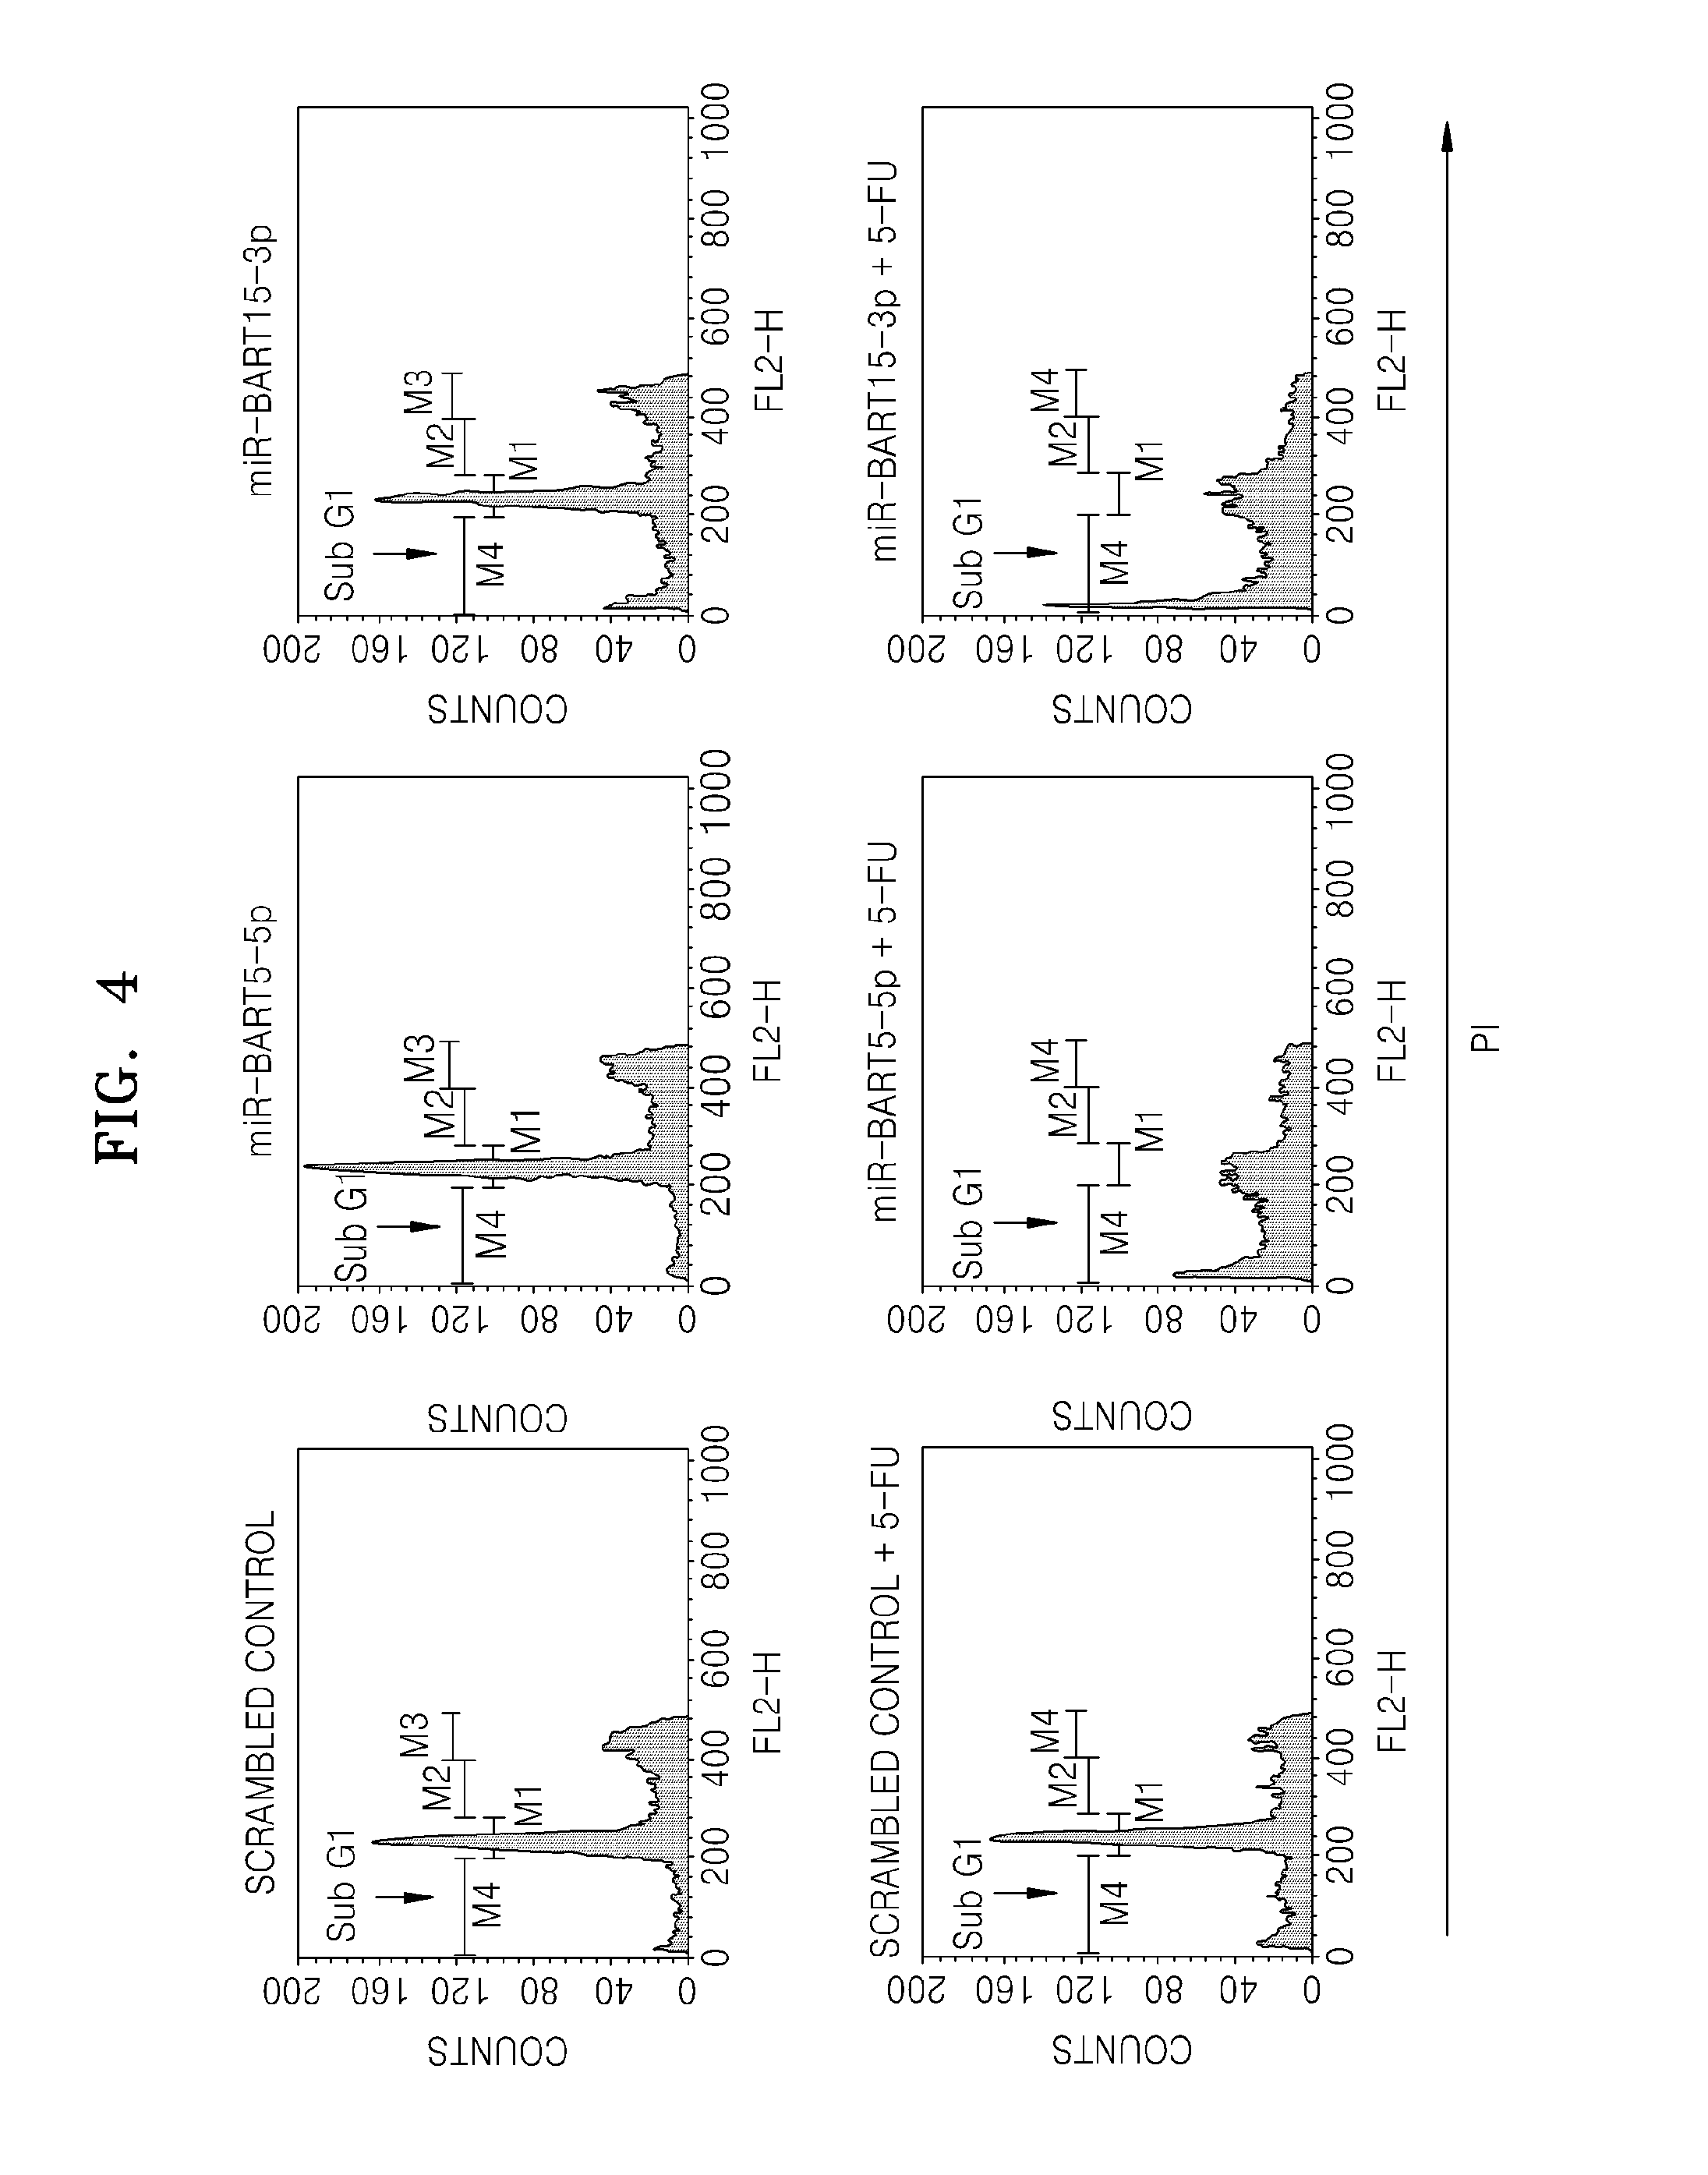 Composition For Promoting Apoptosis Or Inhibiting Cell Growth, Comprising Epstein-Barr Virus Microrna